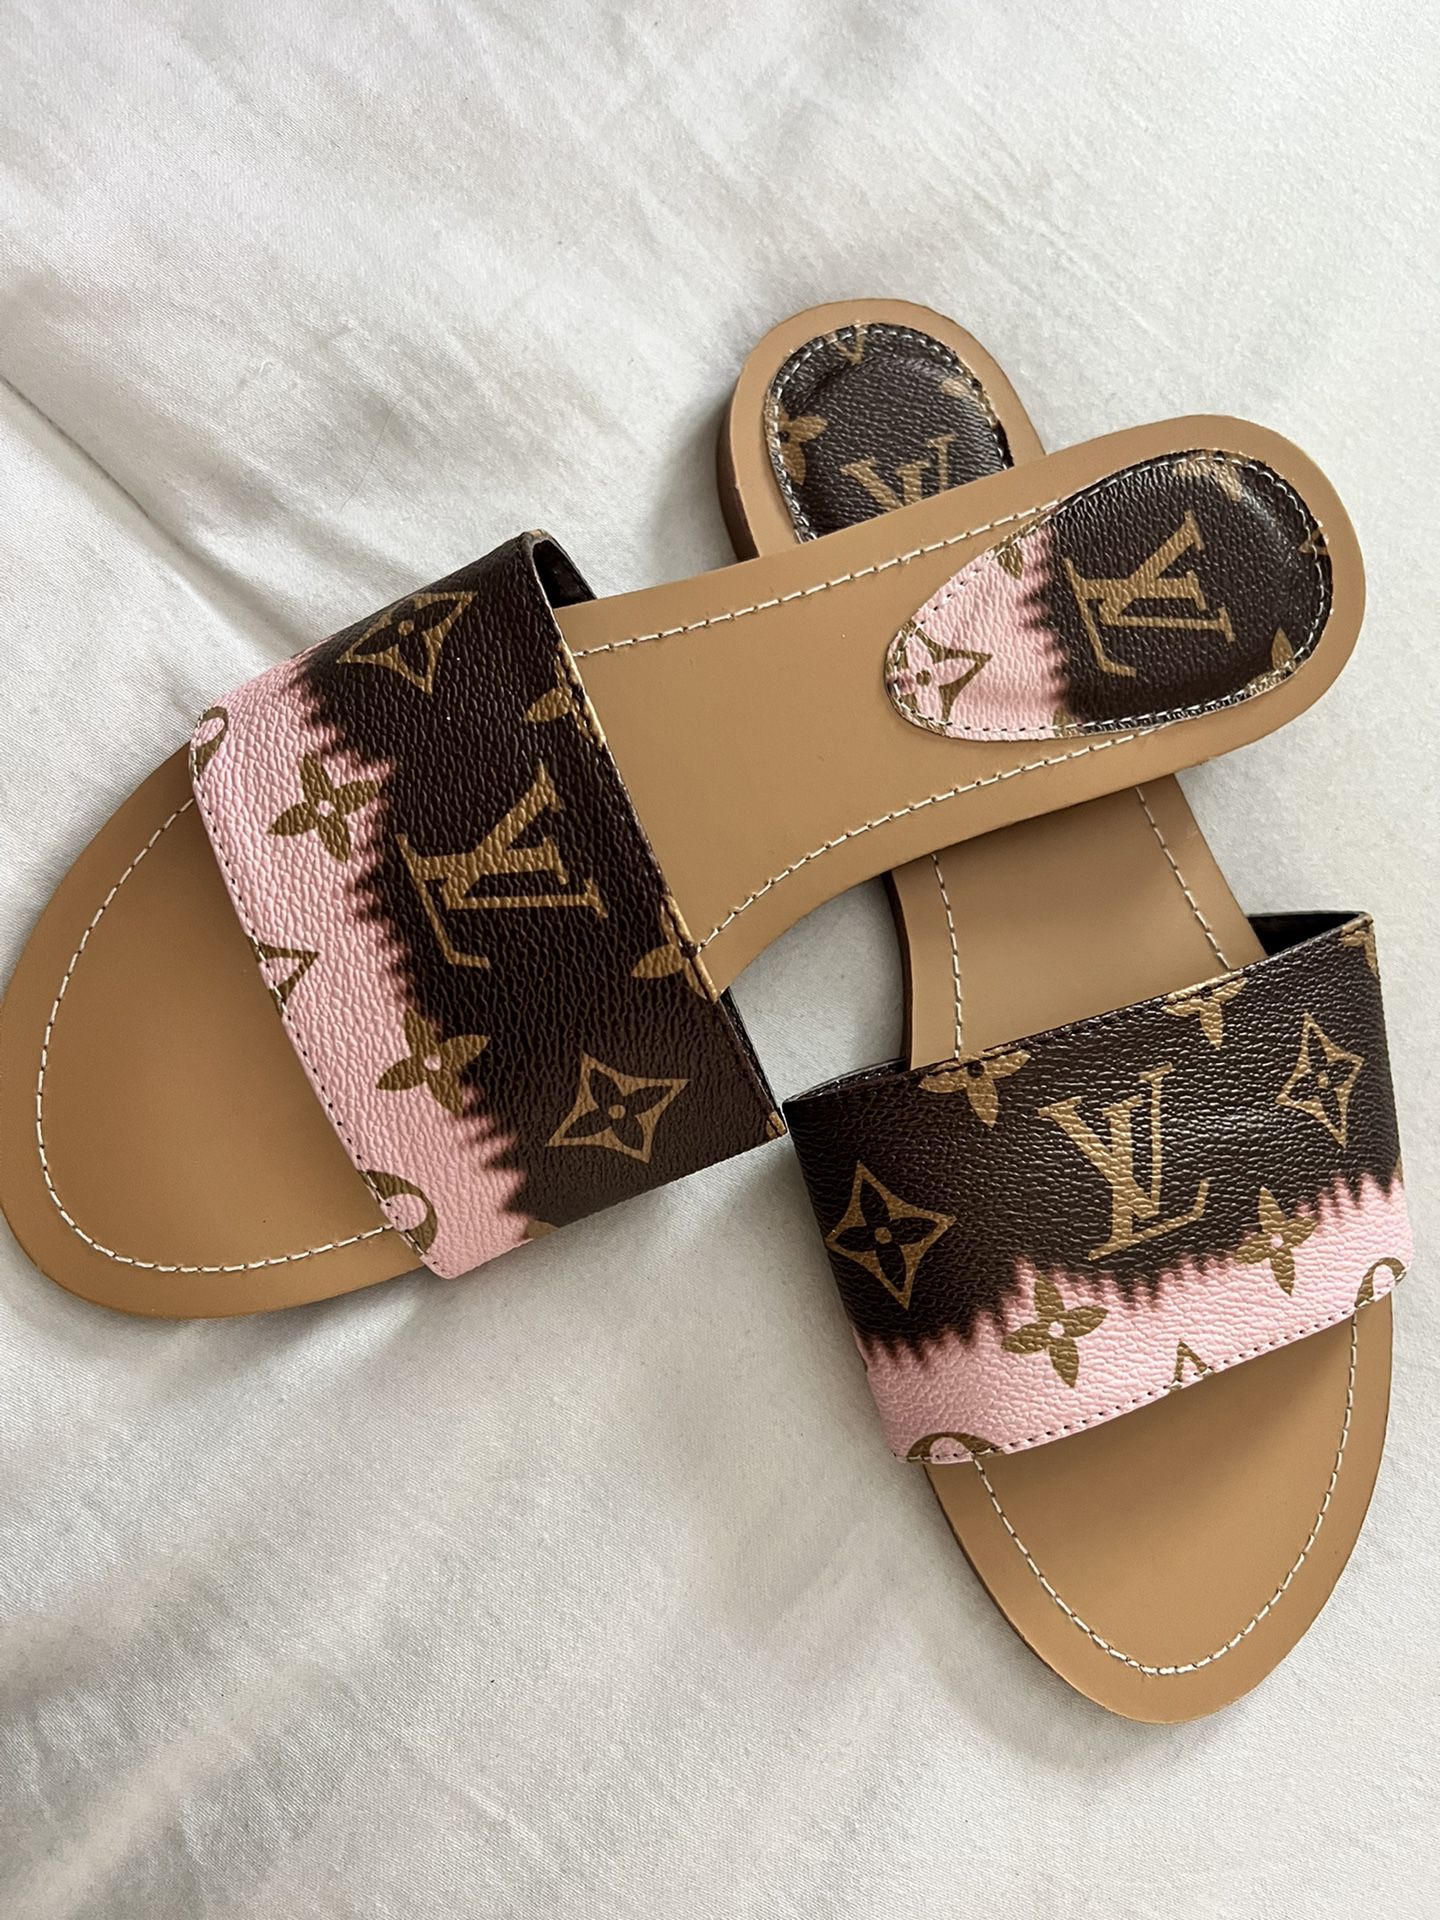 LV THONG SANDALS for Sale in Lafayette, CO - OfferUp